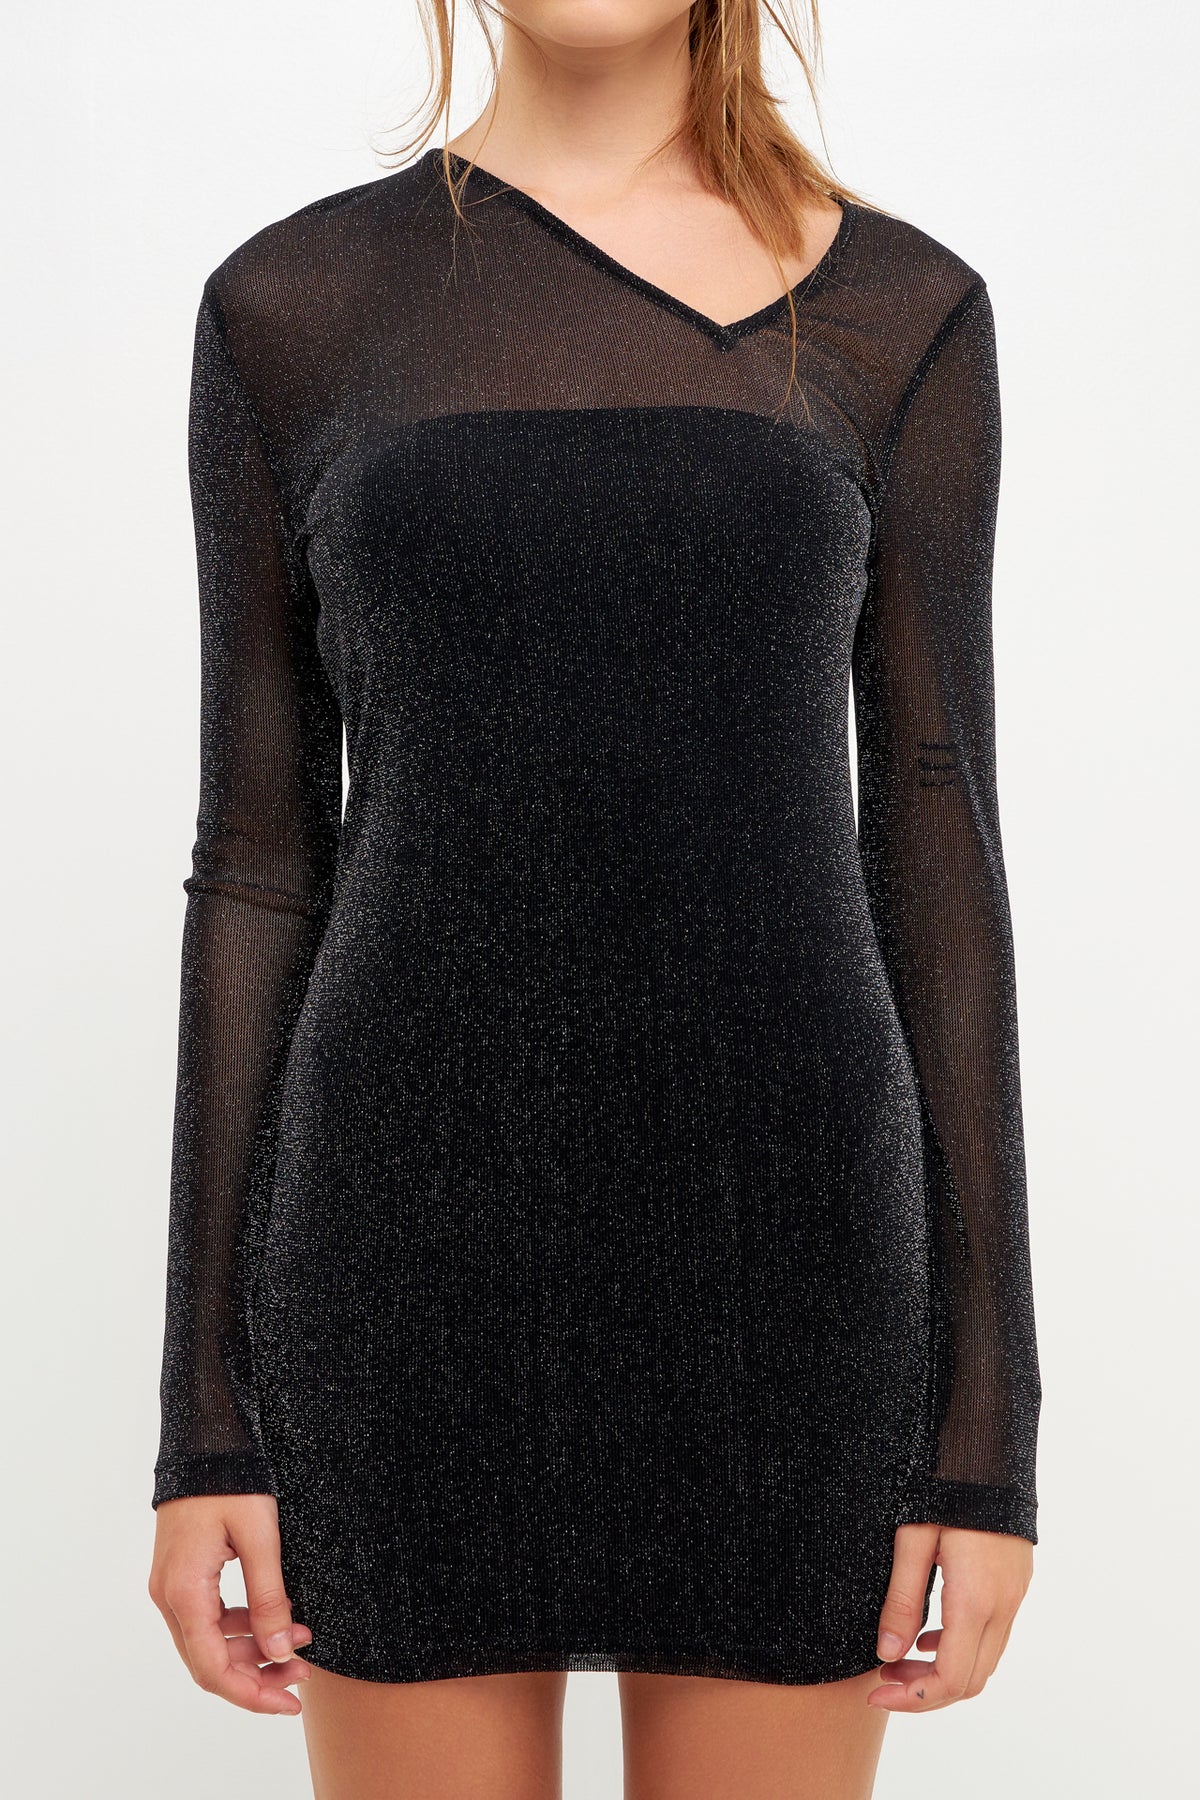 GREY LAB - Sparkly Mini Dress with Cut out Detail - DRESSES available at Objectrare